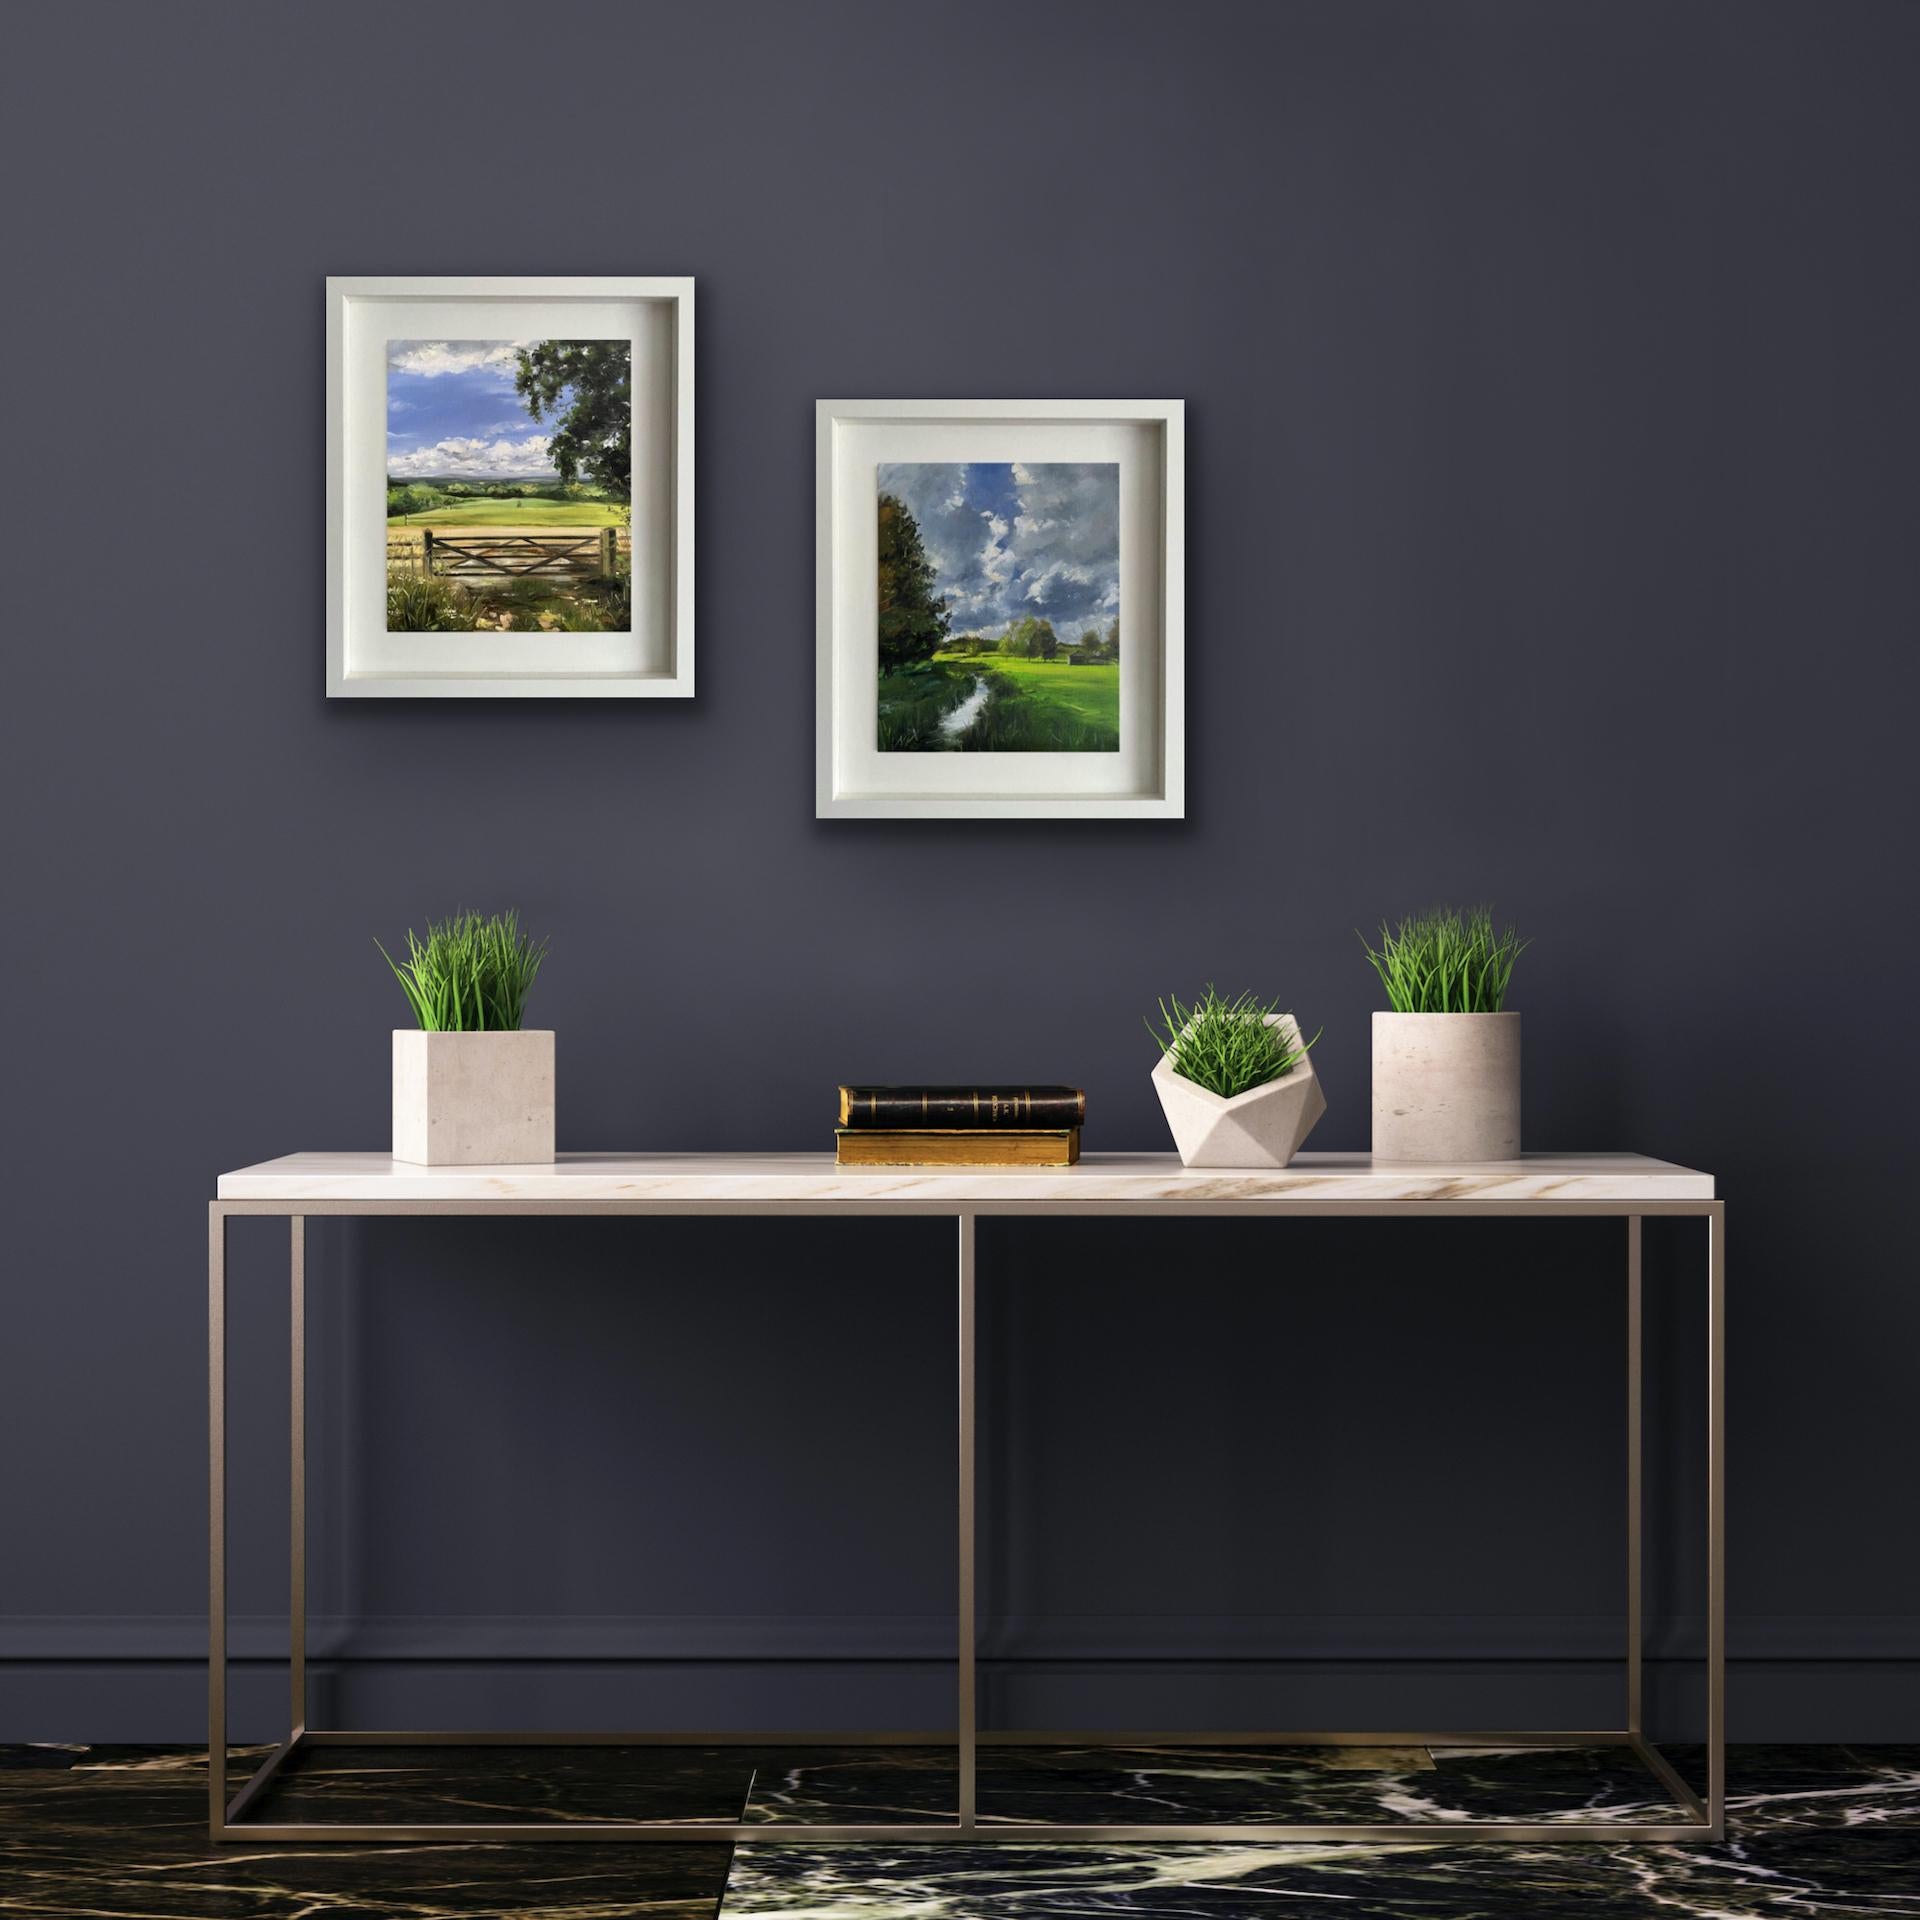 Cotswold Landscape Diptych by Tushar Sabale

Consists of
Gated Fields In Cotswold
River Coln In Cotswold Hills

Each piece is individually £550

Each piece is individually H30cm x W25cm x D1cm unframed and H43cm x W38cm x D3cm framed

Minimum wall